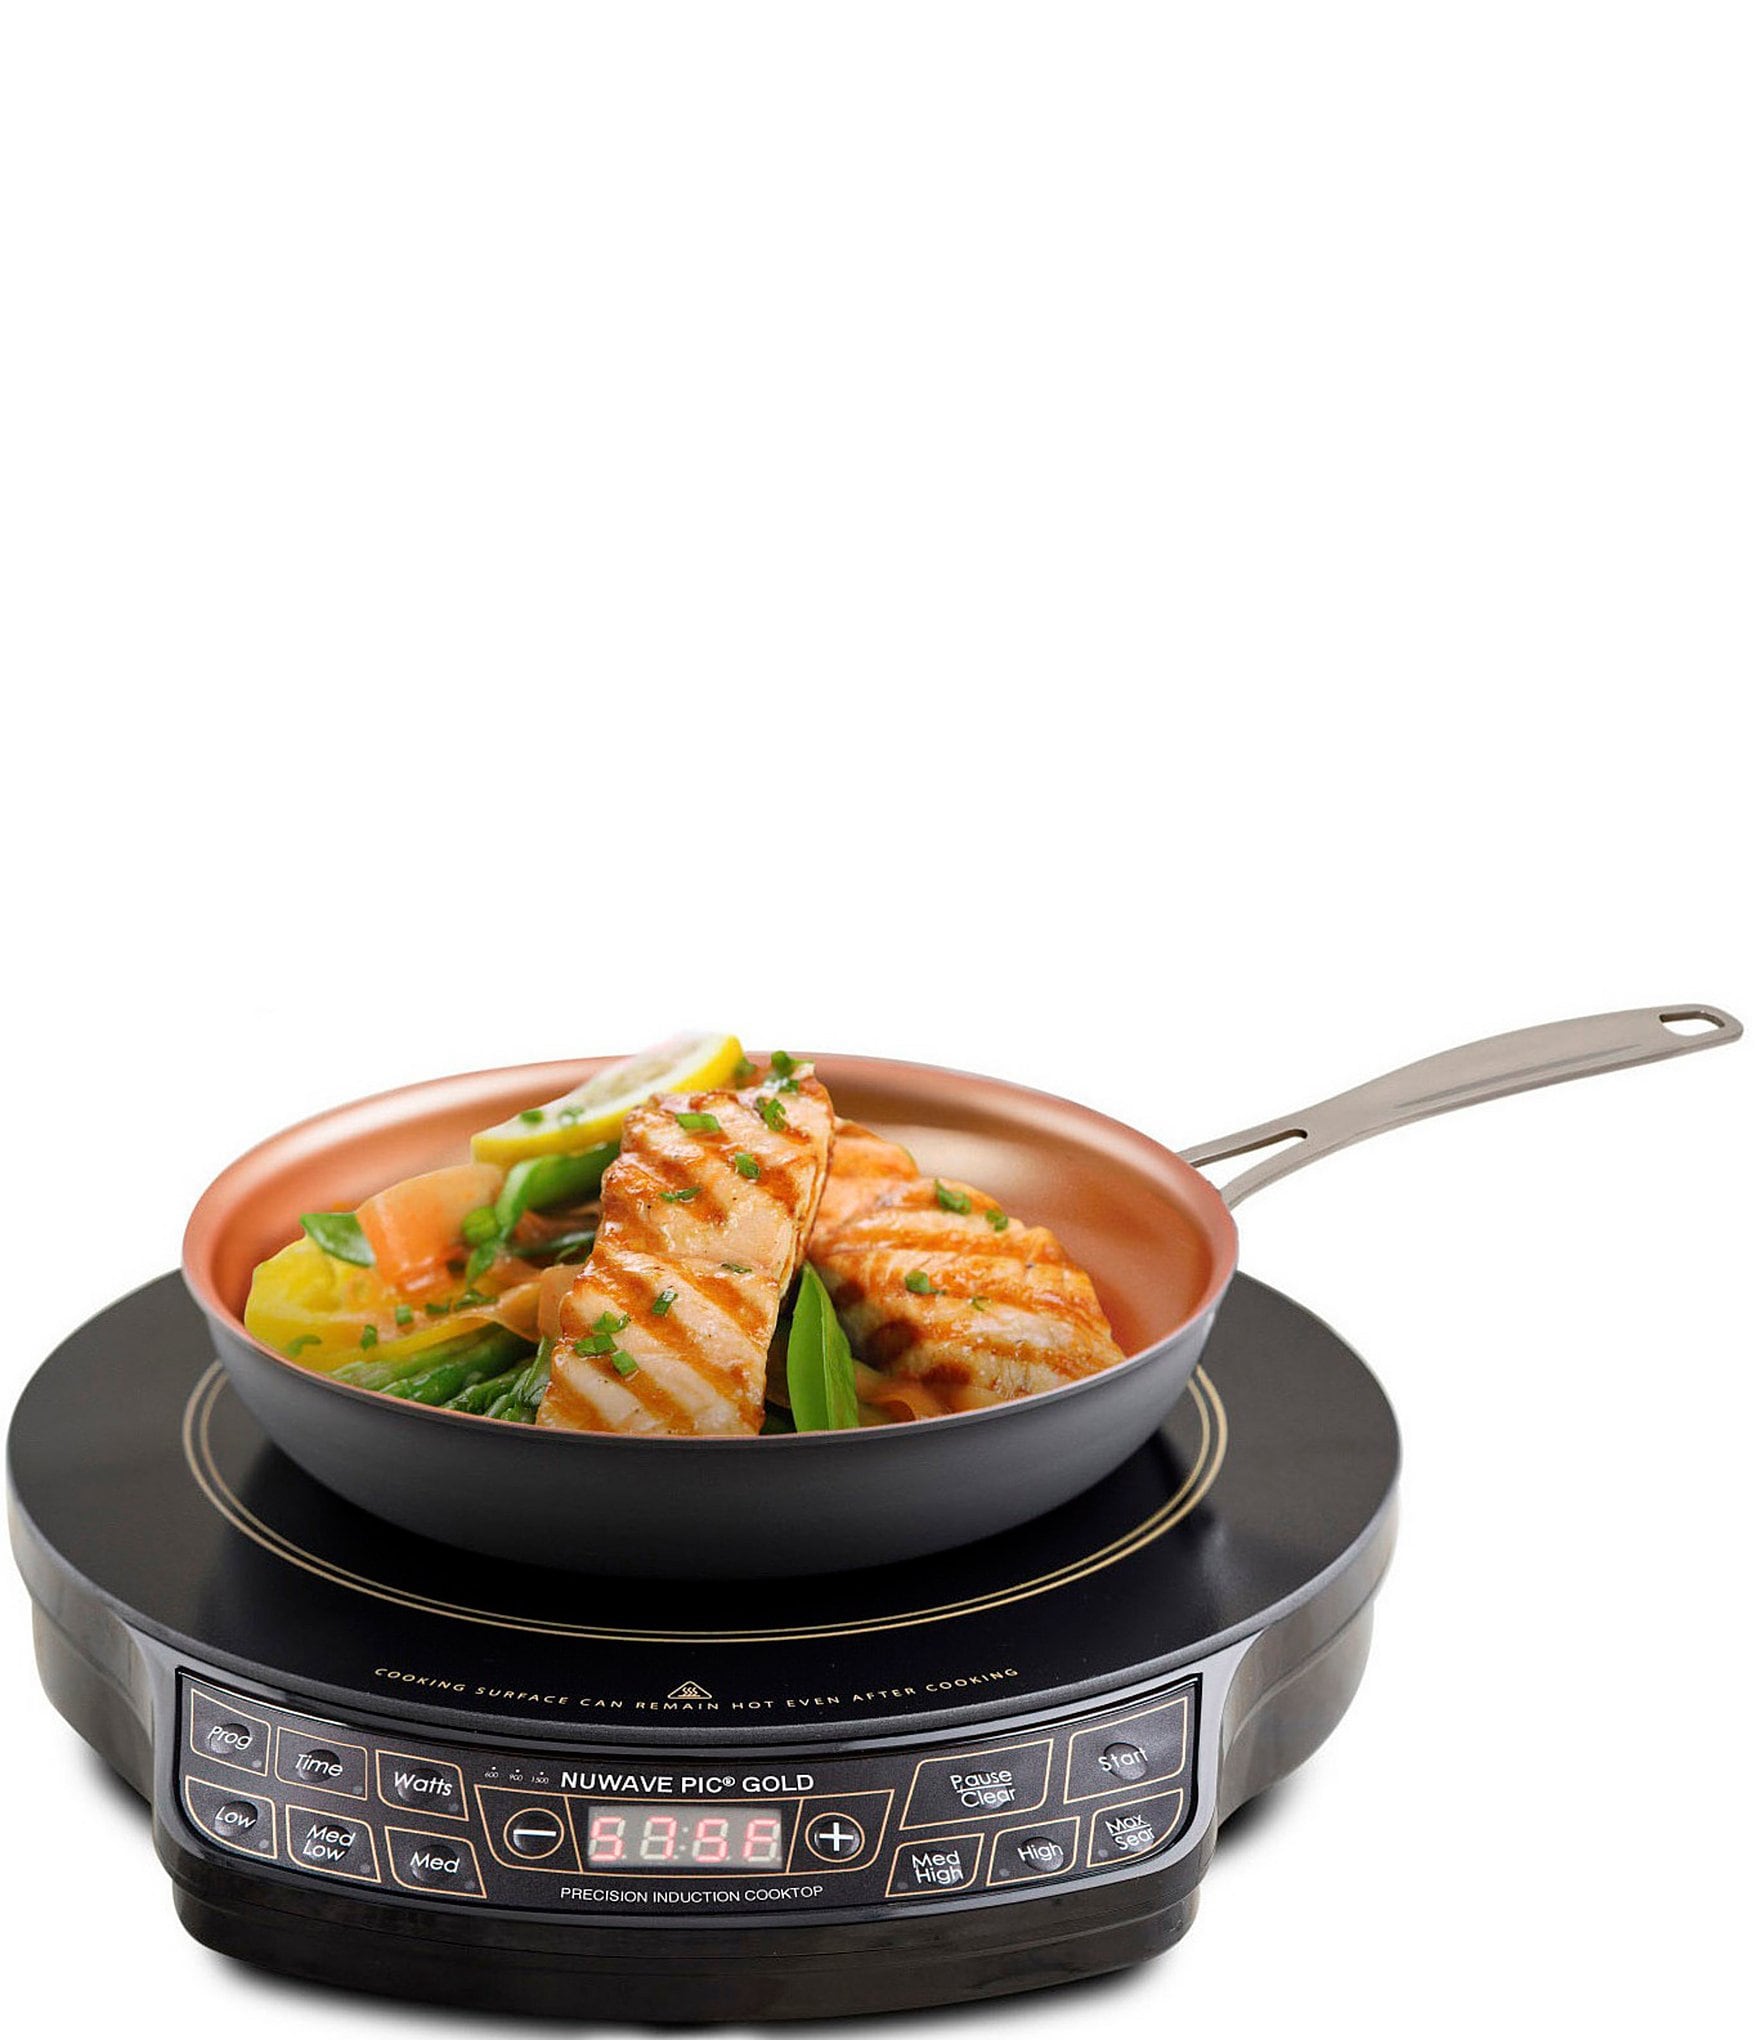 https://dimg.dillards.com/is/image/DillardsZoom/zoom/nuwave-pic-gold-precision-induction-cooktop-with-10.5-fry-pan/05507314_zi_black.jpg